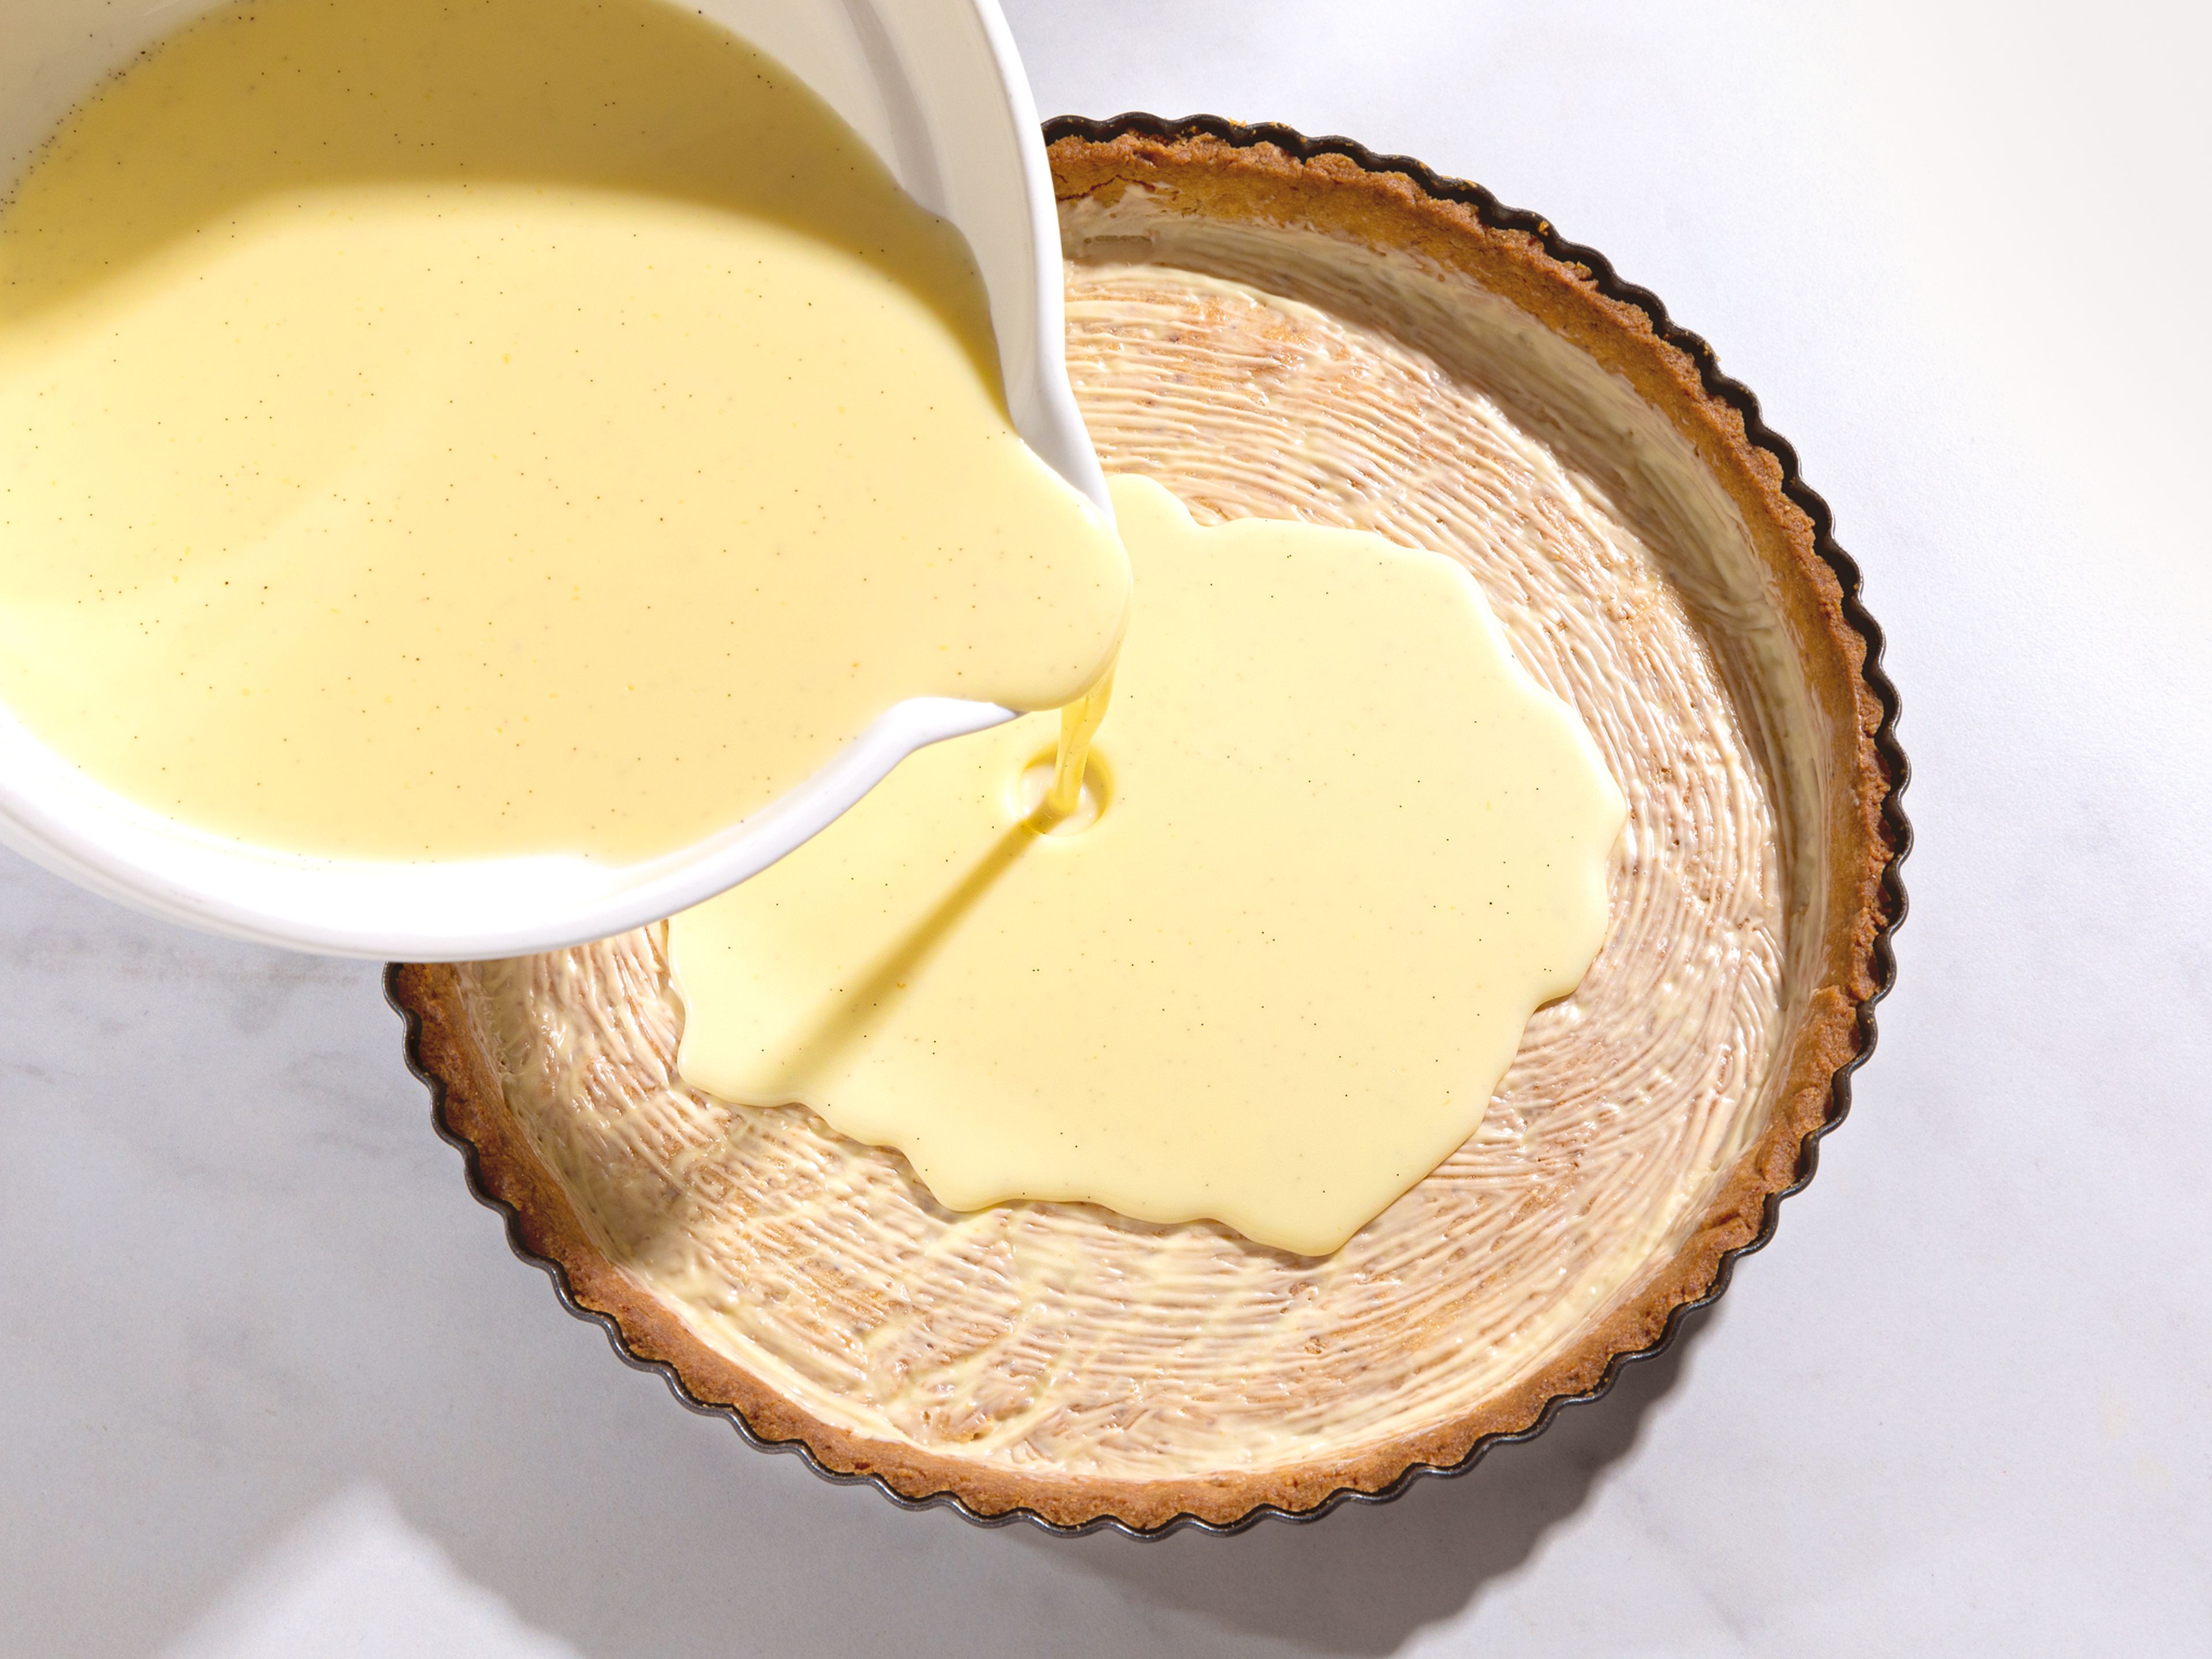 Mix the remaining cream with the sweetened condensed milk in a bowl. Pour the vanilla cream through a fine sieve into the cream and condensed milk mixture and stir everything together. Pour the panna cotta onto the cooled tart base and refrigerate for at least 3 hours.